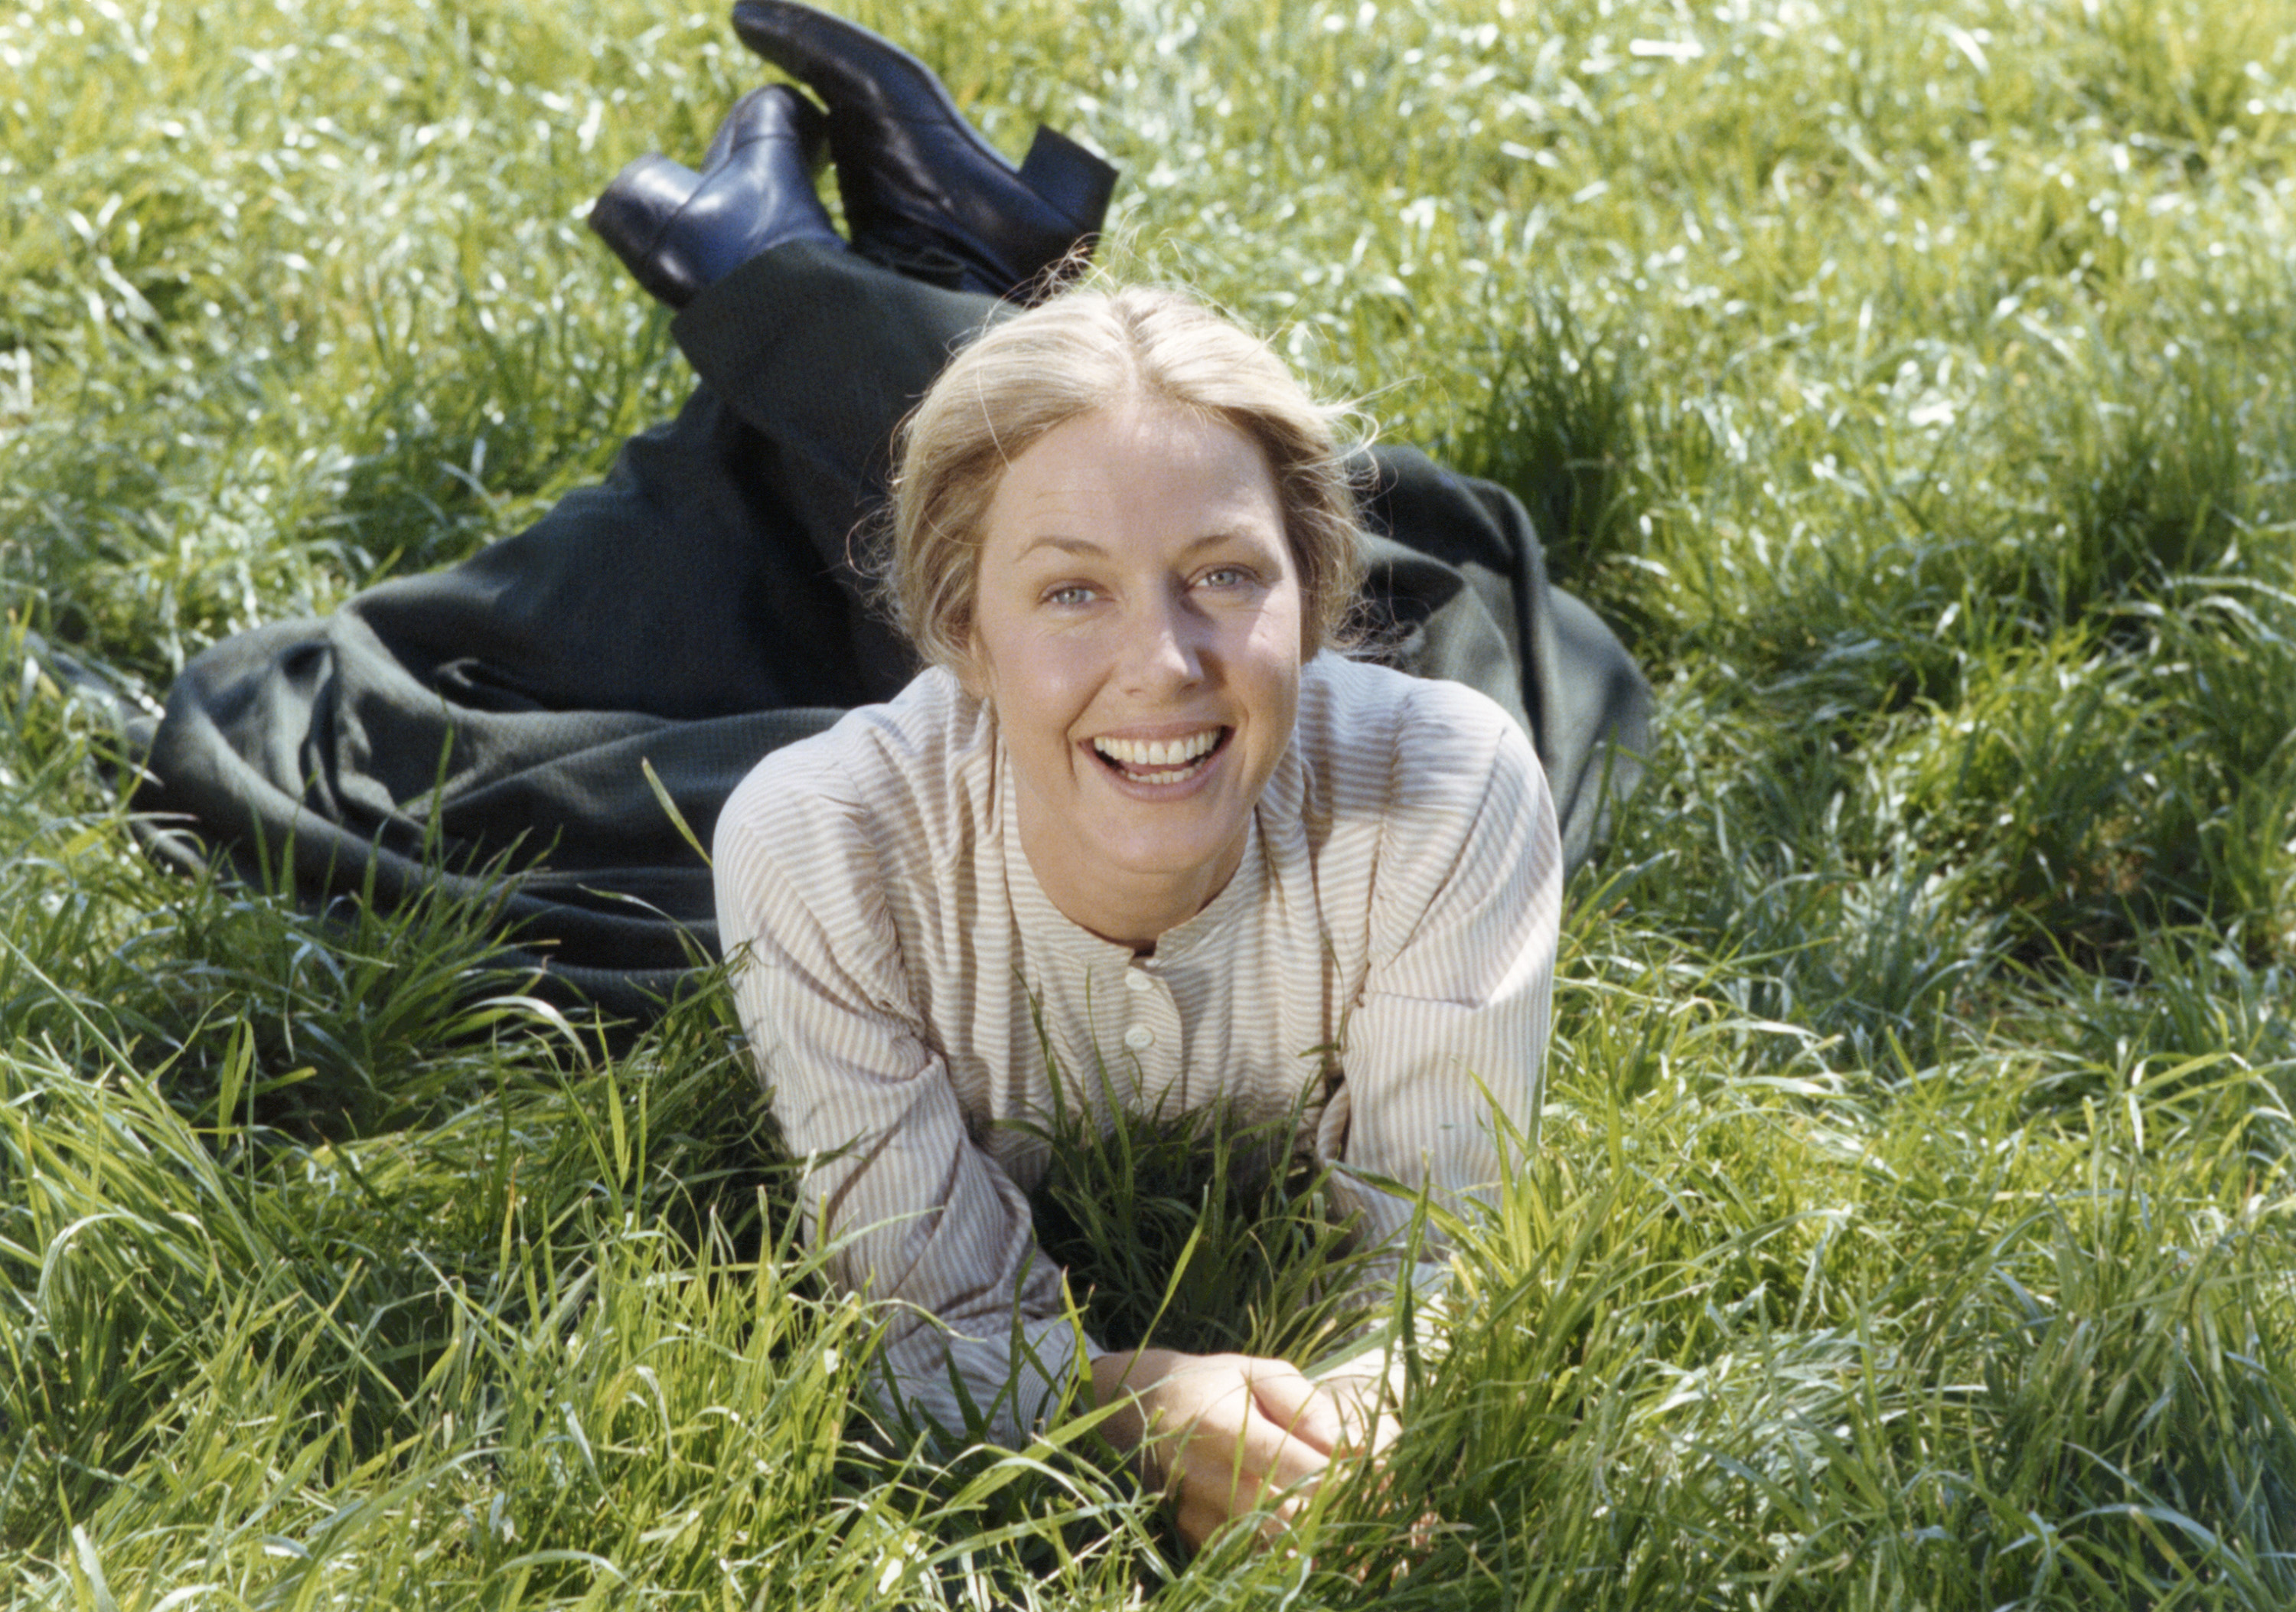 Karen Grassle in "Little House on the Prairie," circa 1975 | Source: Getty Images